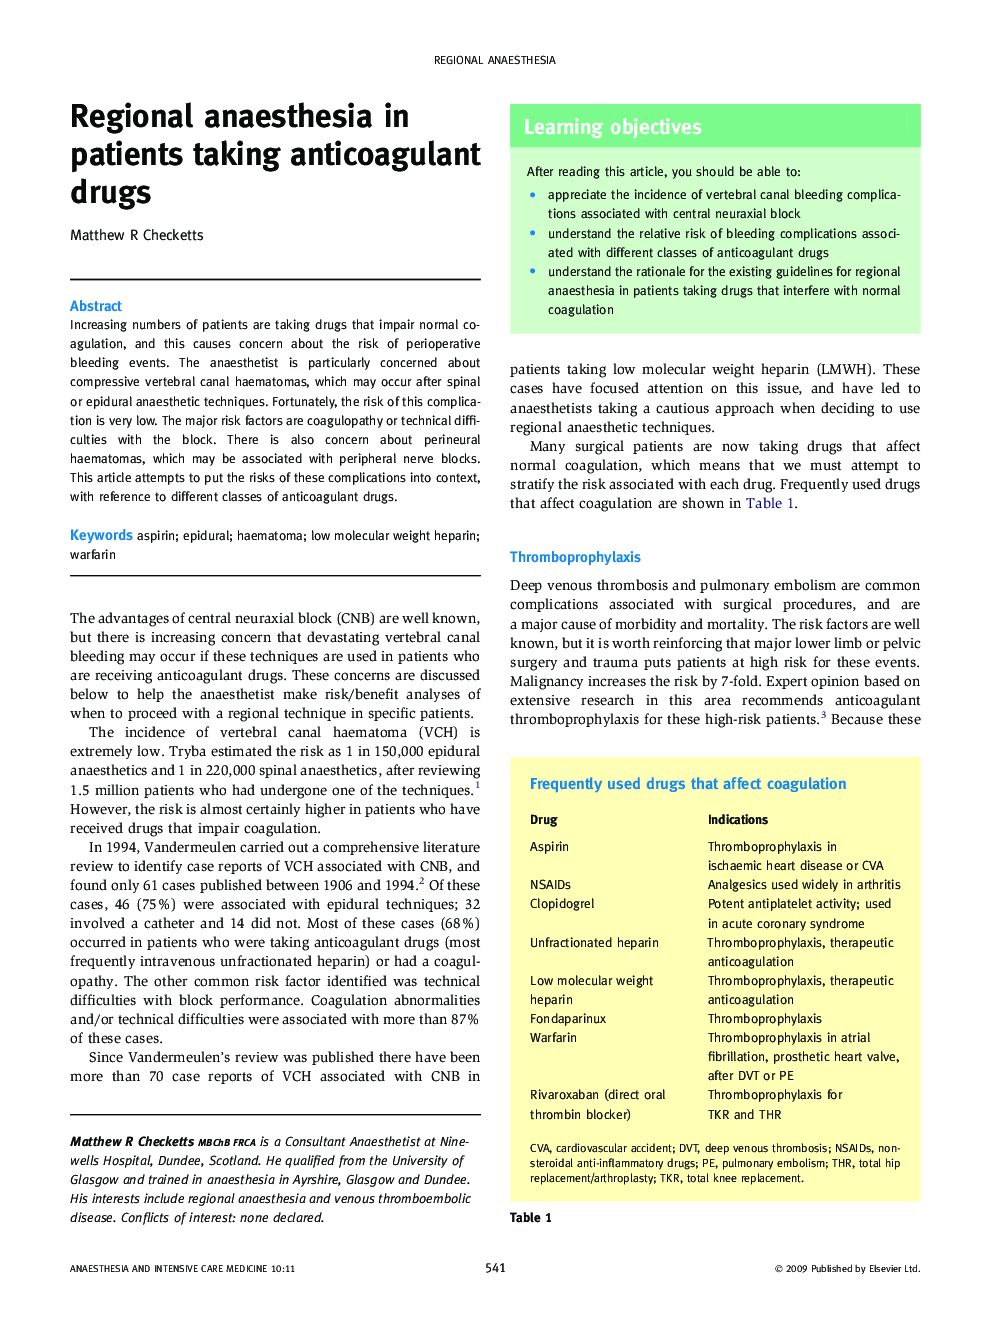 Regional anaesthesia in patients taking anticoagulant drugs